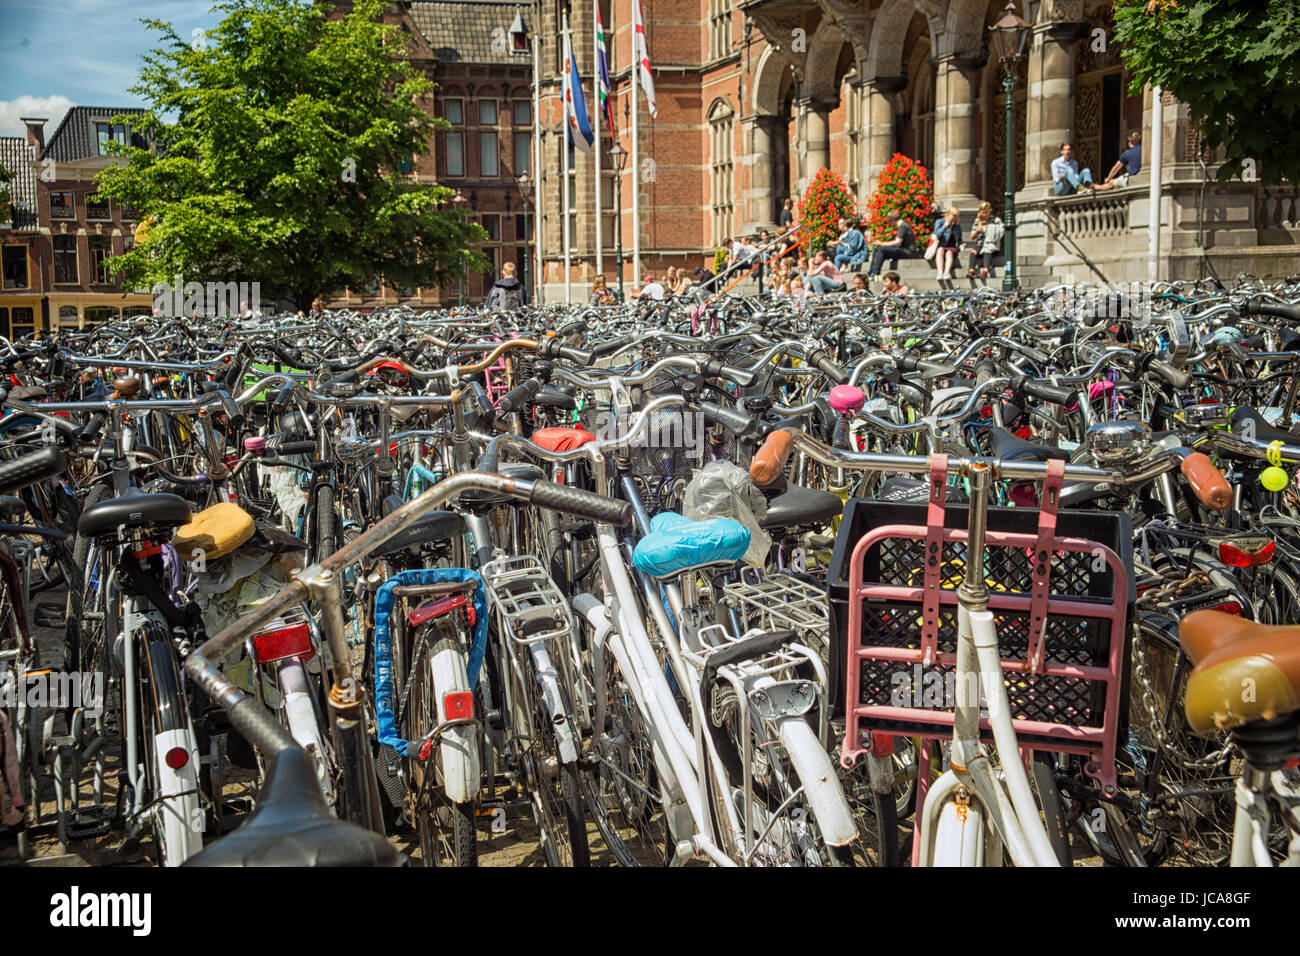 Hundreds of bikes in front of the main entrance of the RUG University of Groningen in the Netherlands Stock Photo